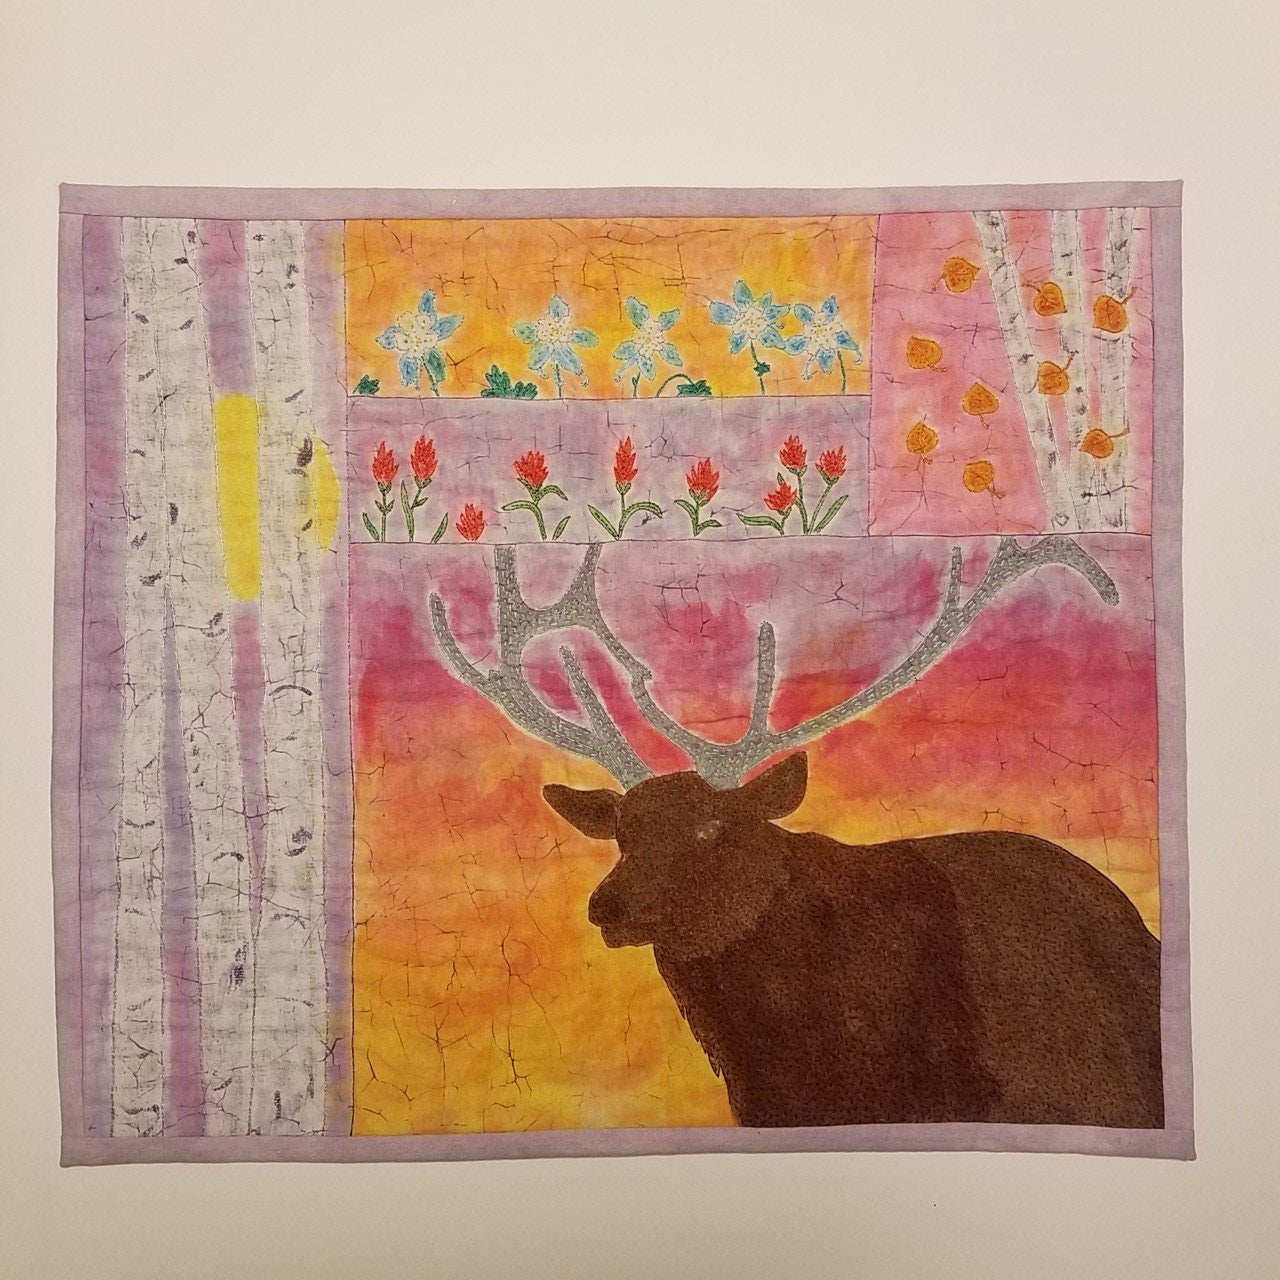 Fiber Art Wall Hanging " Elk " Artist: Crystal Lawrence Hand dyed and hand stitched fabric art piece  Wyoming wildflowers and Aspen trees come to life  Bull Elk standing in the sunset  25" long x 21" high  Wooden dowel with fabric slots on back of piece for hanging  A beautiful one of a kind piece of art that will become a family heirloom  Please note, each piece is a handmade and custom designed by the Artist   Location: CLL